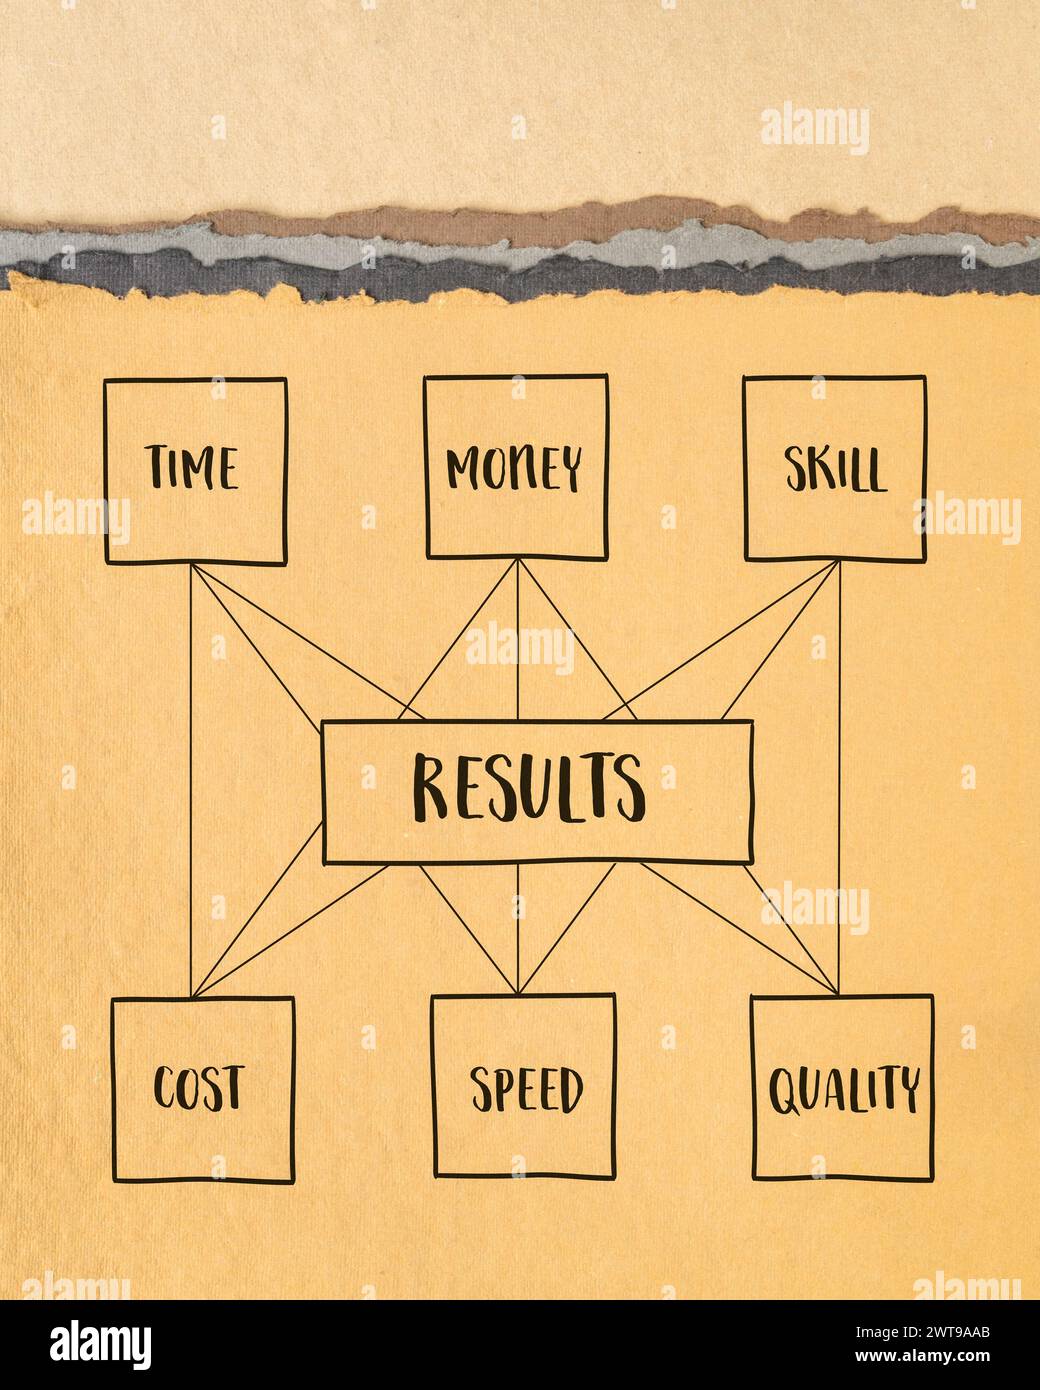 results - project management concept of balance between invested time, money, skill, cost, speed and quality, sketch on art paper Stock Photo